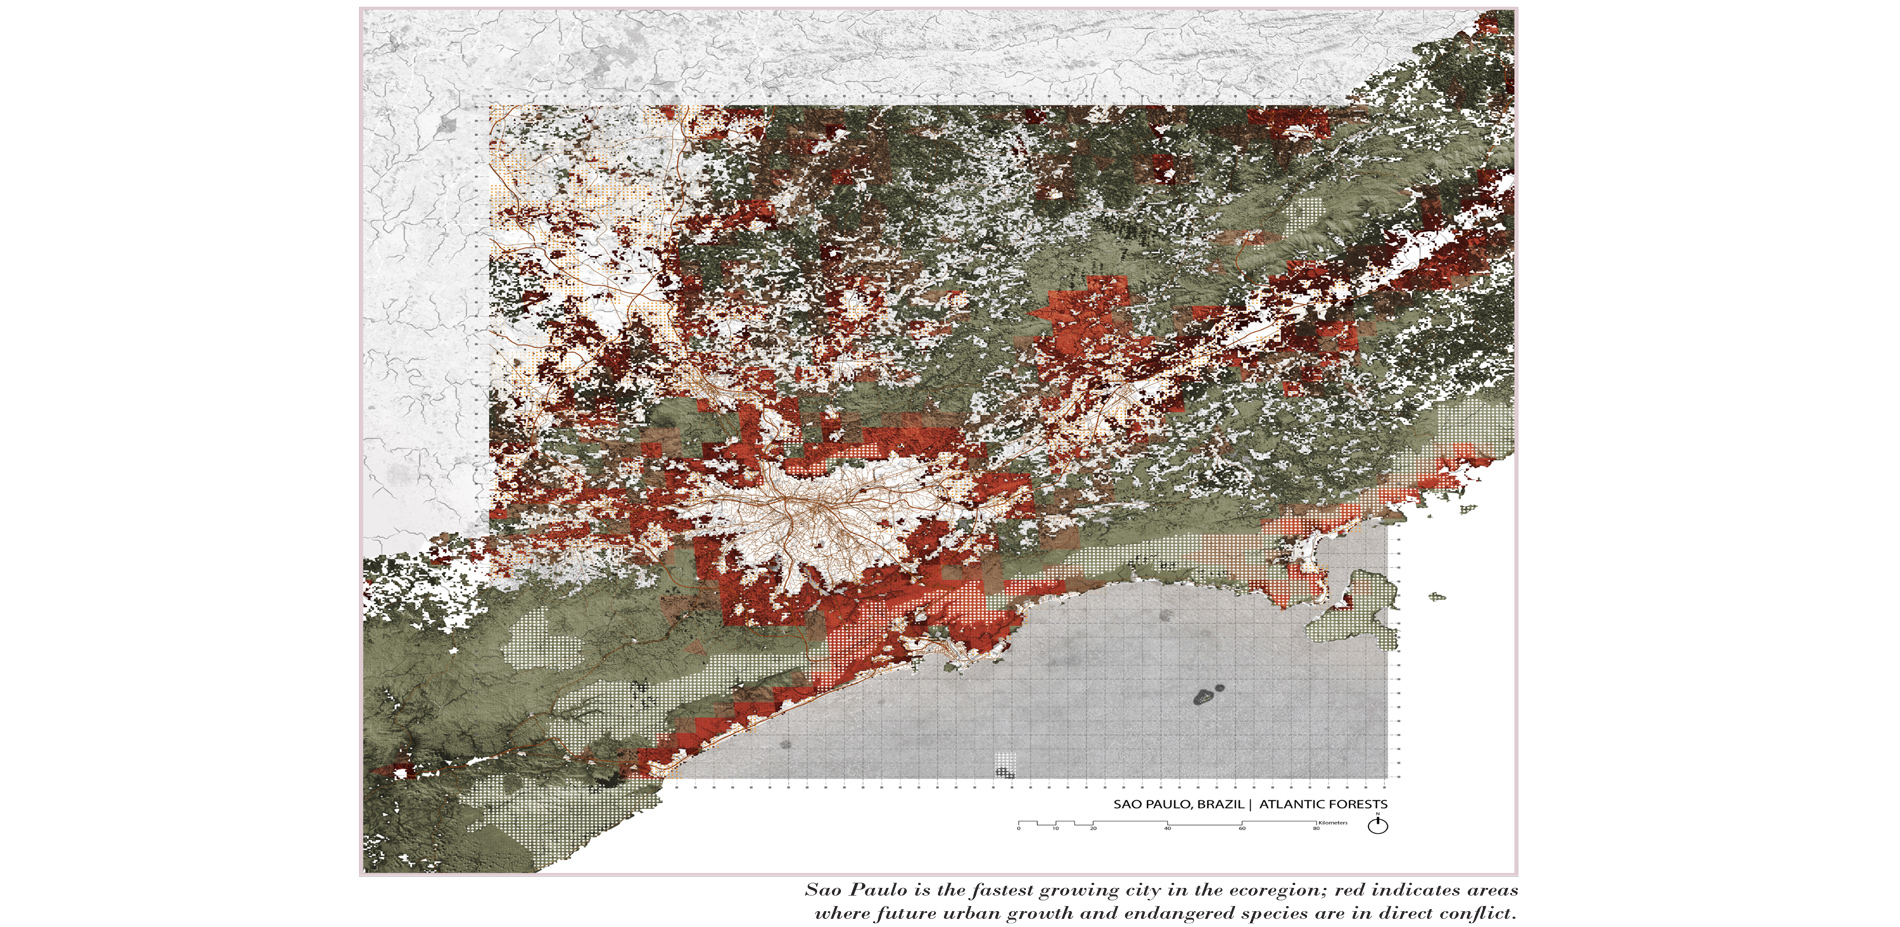 The city of Sao Paulo - an example of mapping that shows  (in red) at high resolution peri-urban areas of conclict between urban growth (projected to …